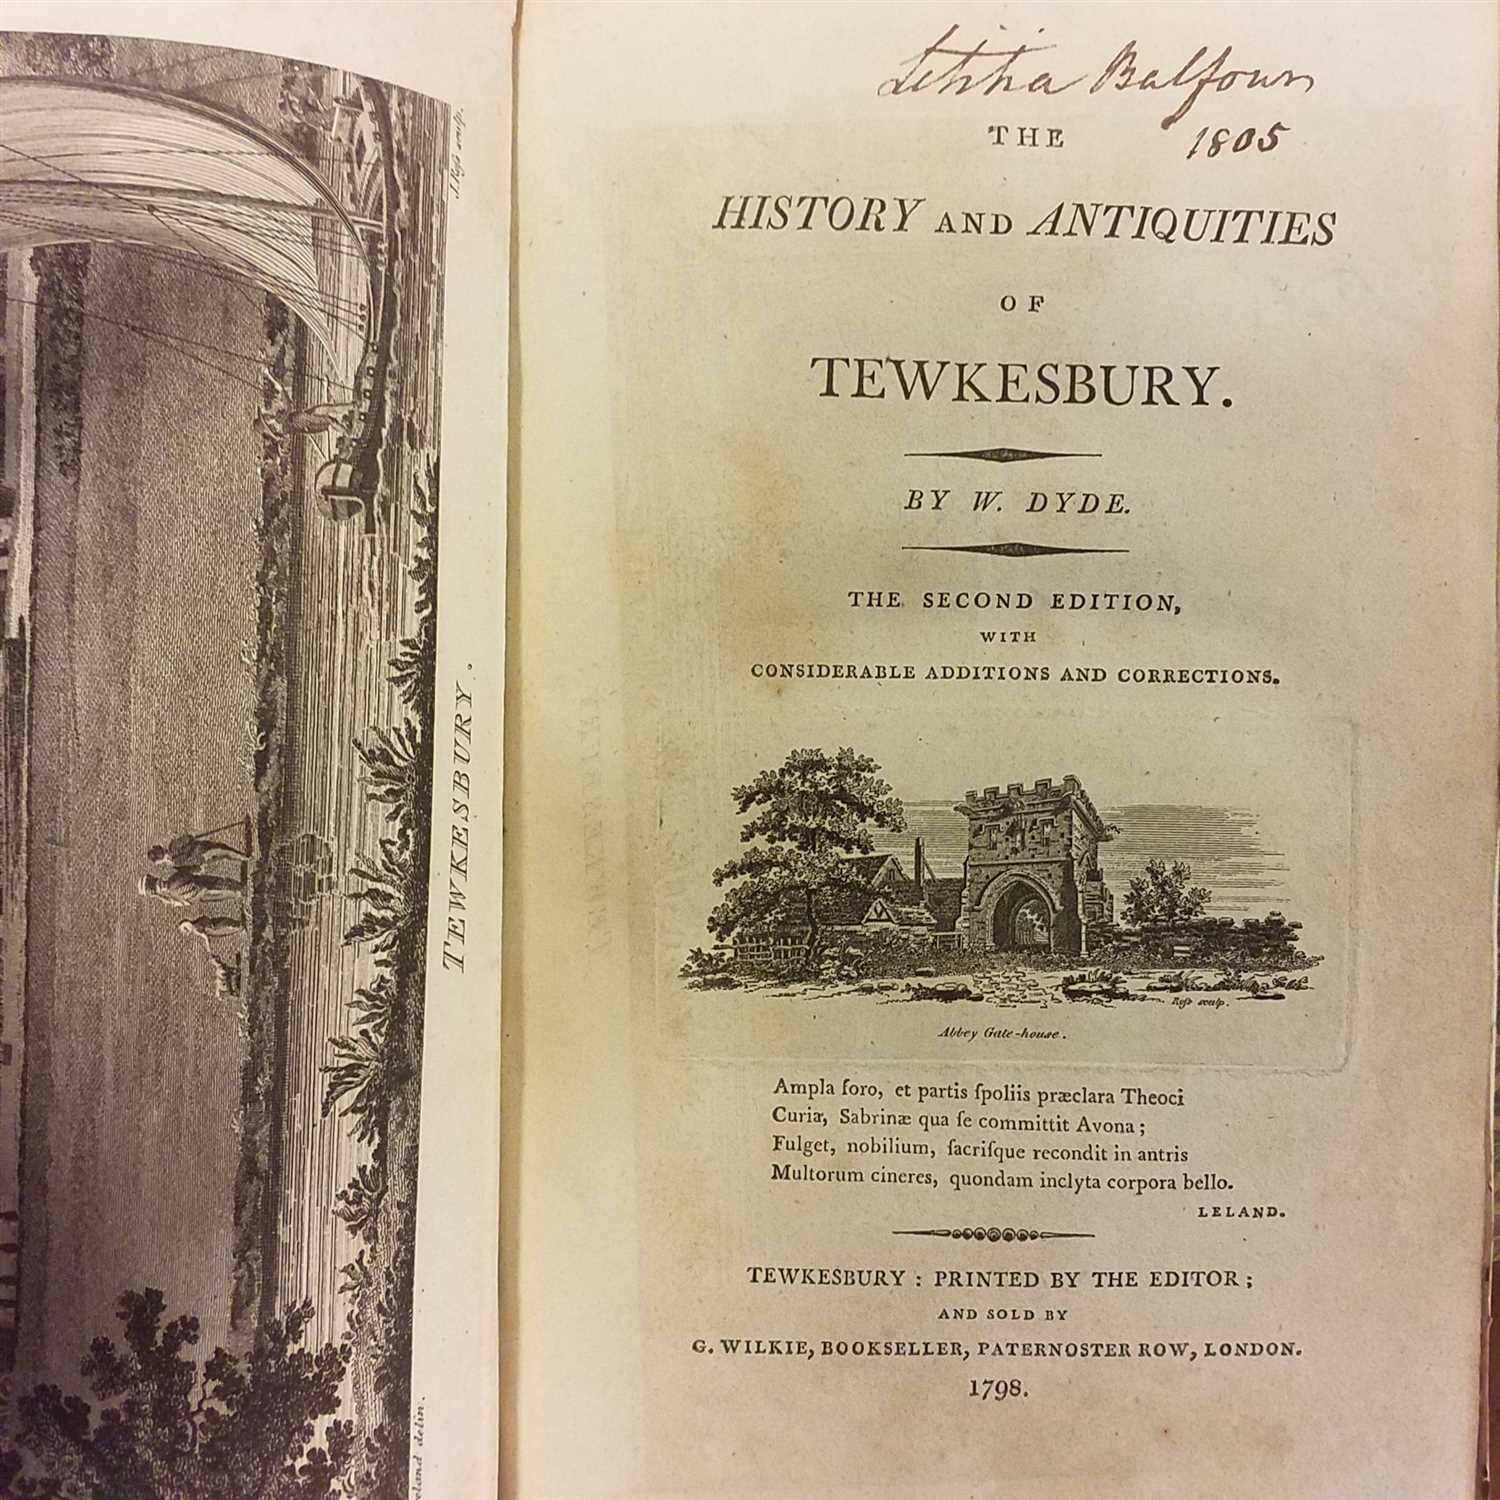 Lot 242 - Dyde (W.) The History and Antiquities of Tewkesbury, 2nd edition, 1798